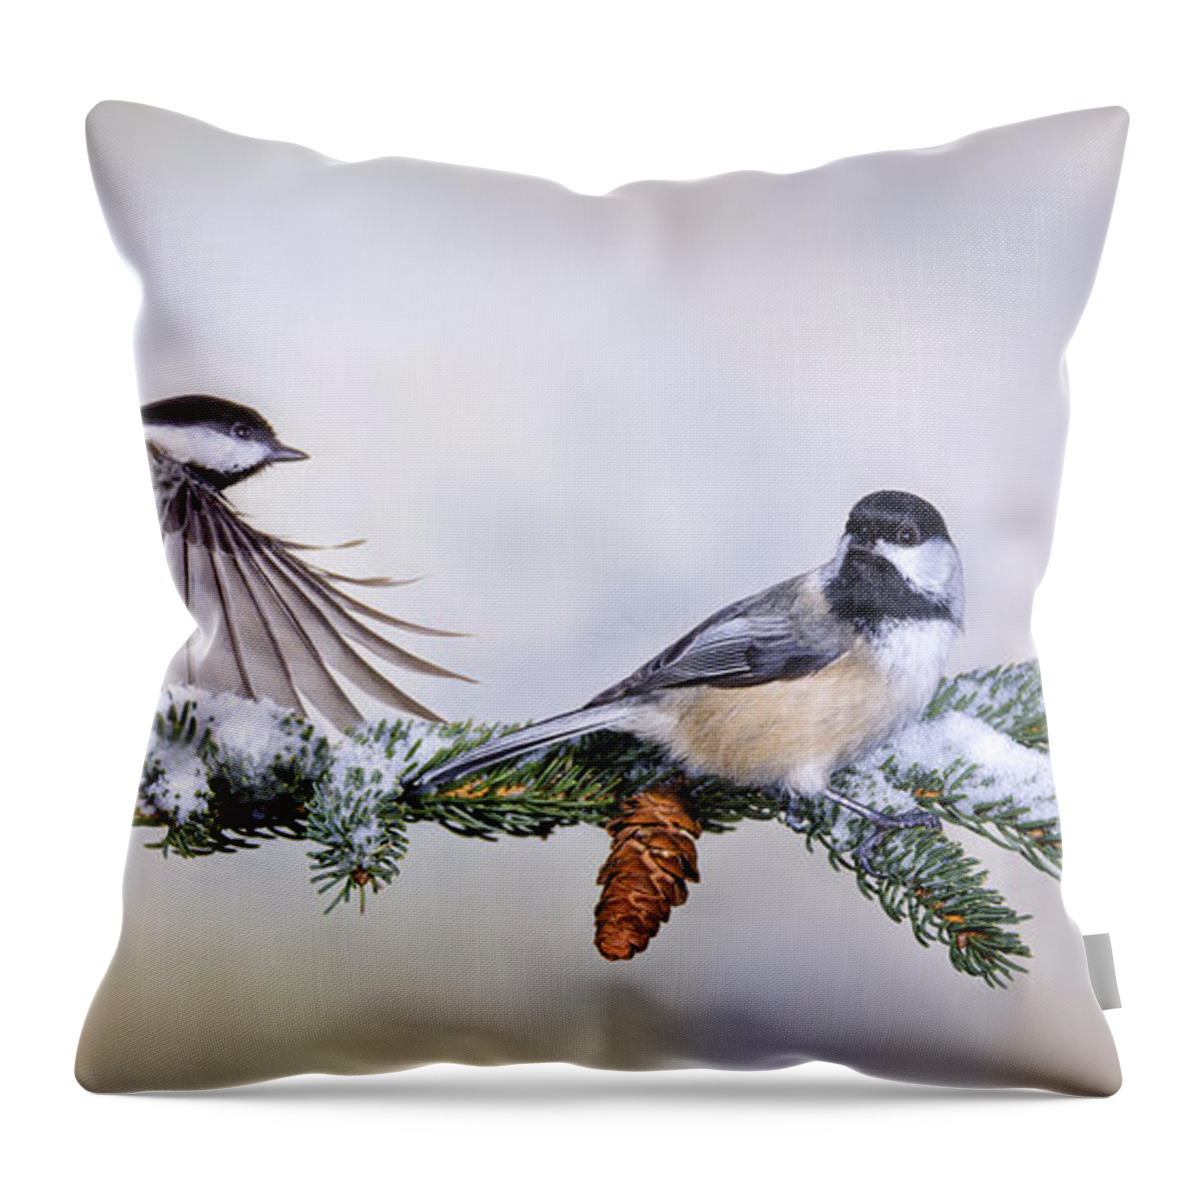 Chickadees Throw Pillow featuring the photograph February Friends by Peg Runyan